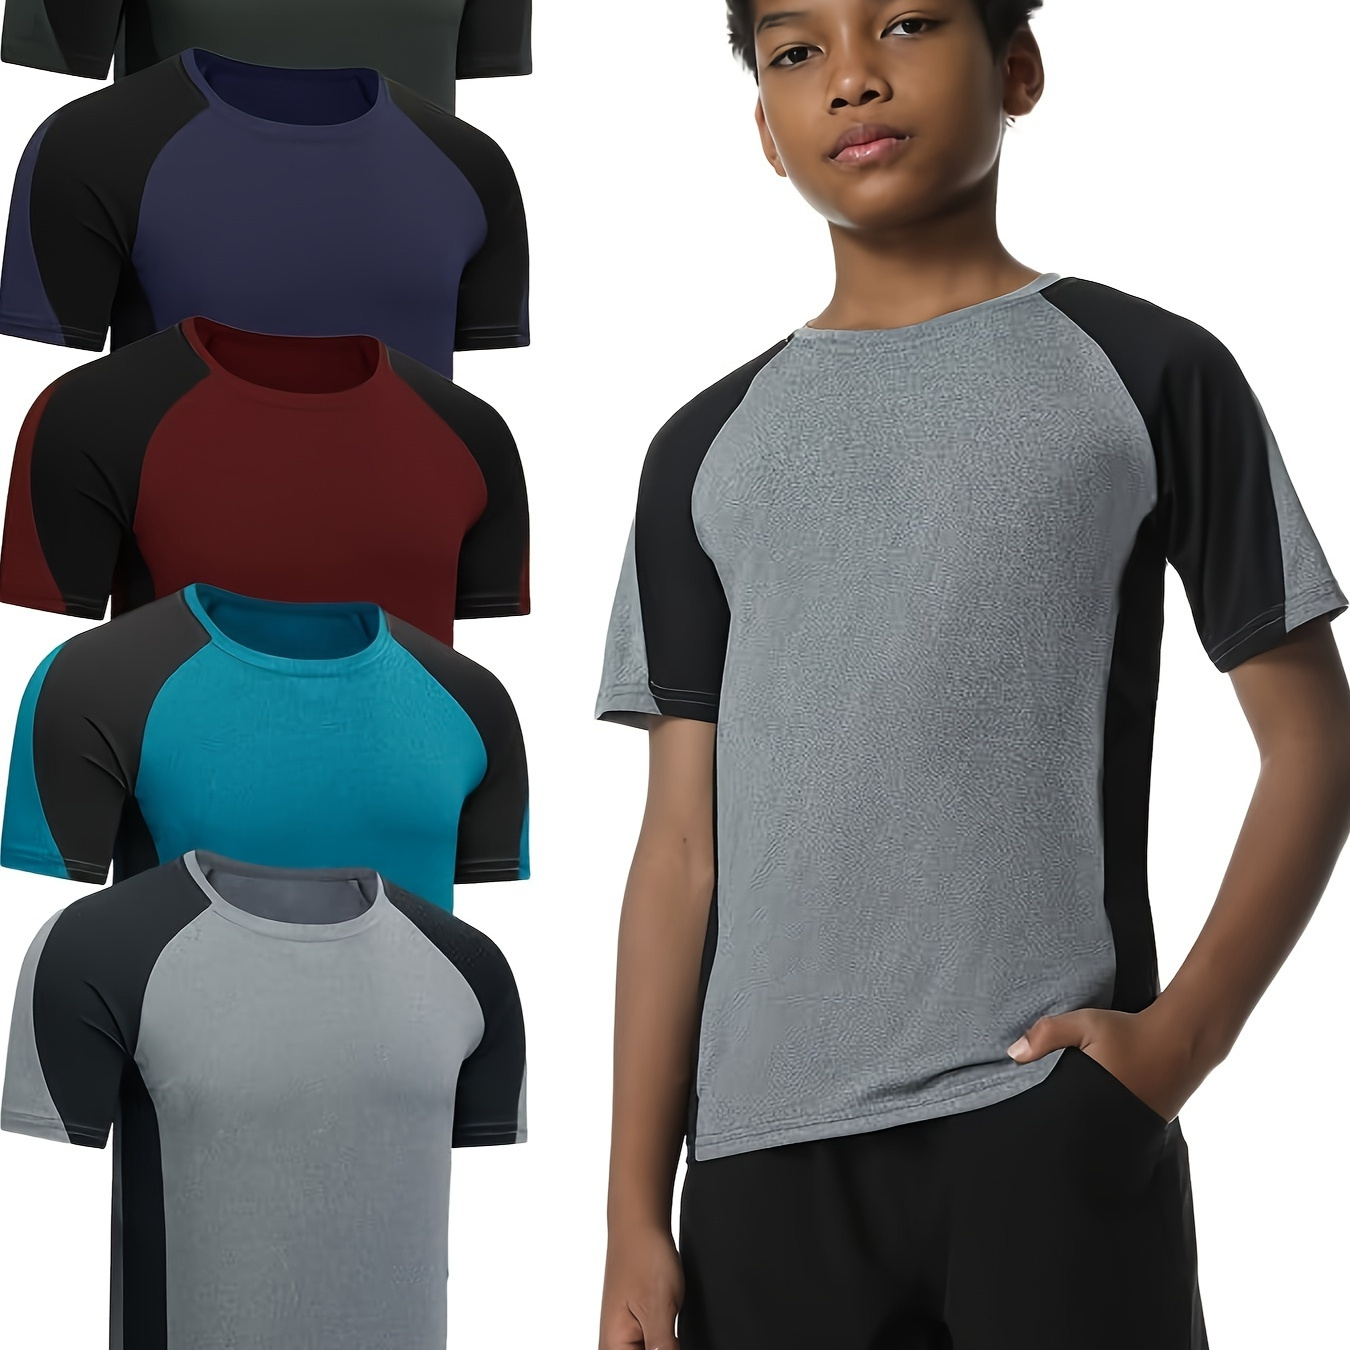 

5pcs Boy's Short Sleeve Quick Dry Athletic T-shirt, Comfy Active Breathable Sports Fitness Sports Top For Summer